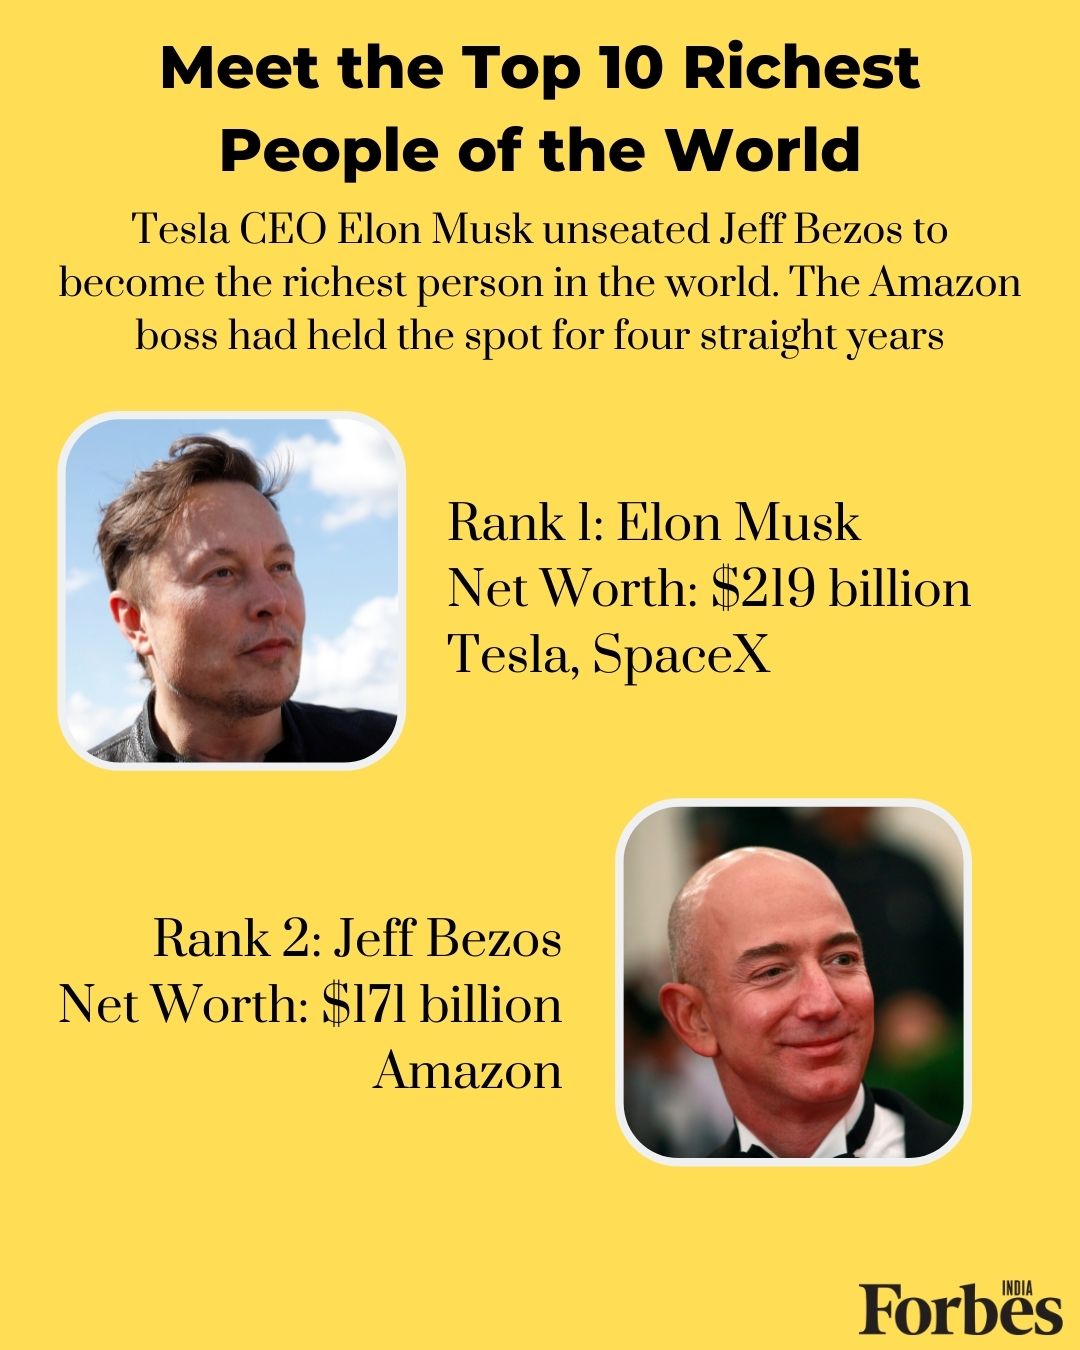 Elon Musk unseats Jeff Bezos as richest person; fewer billionaires in the world today